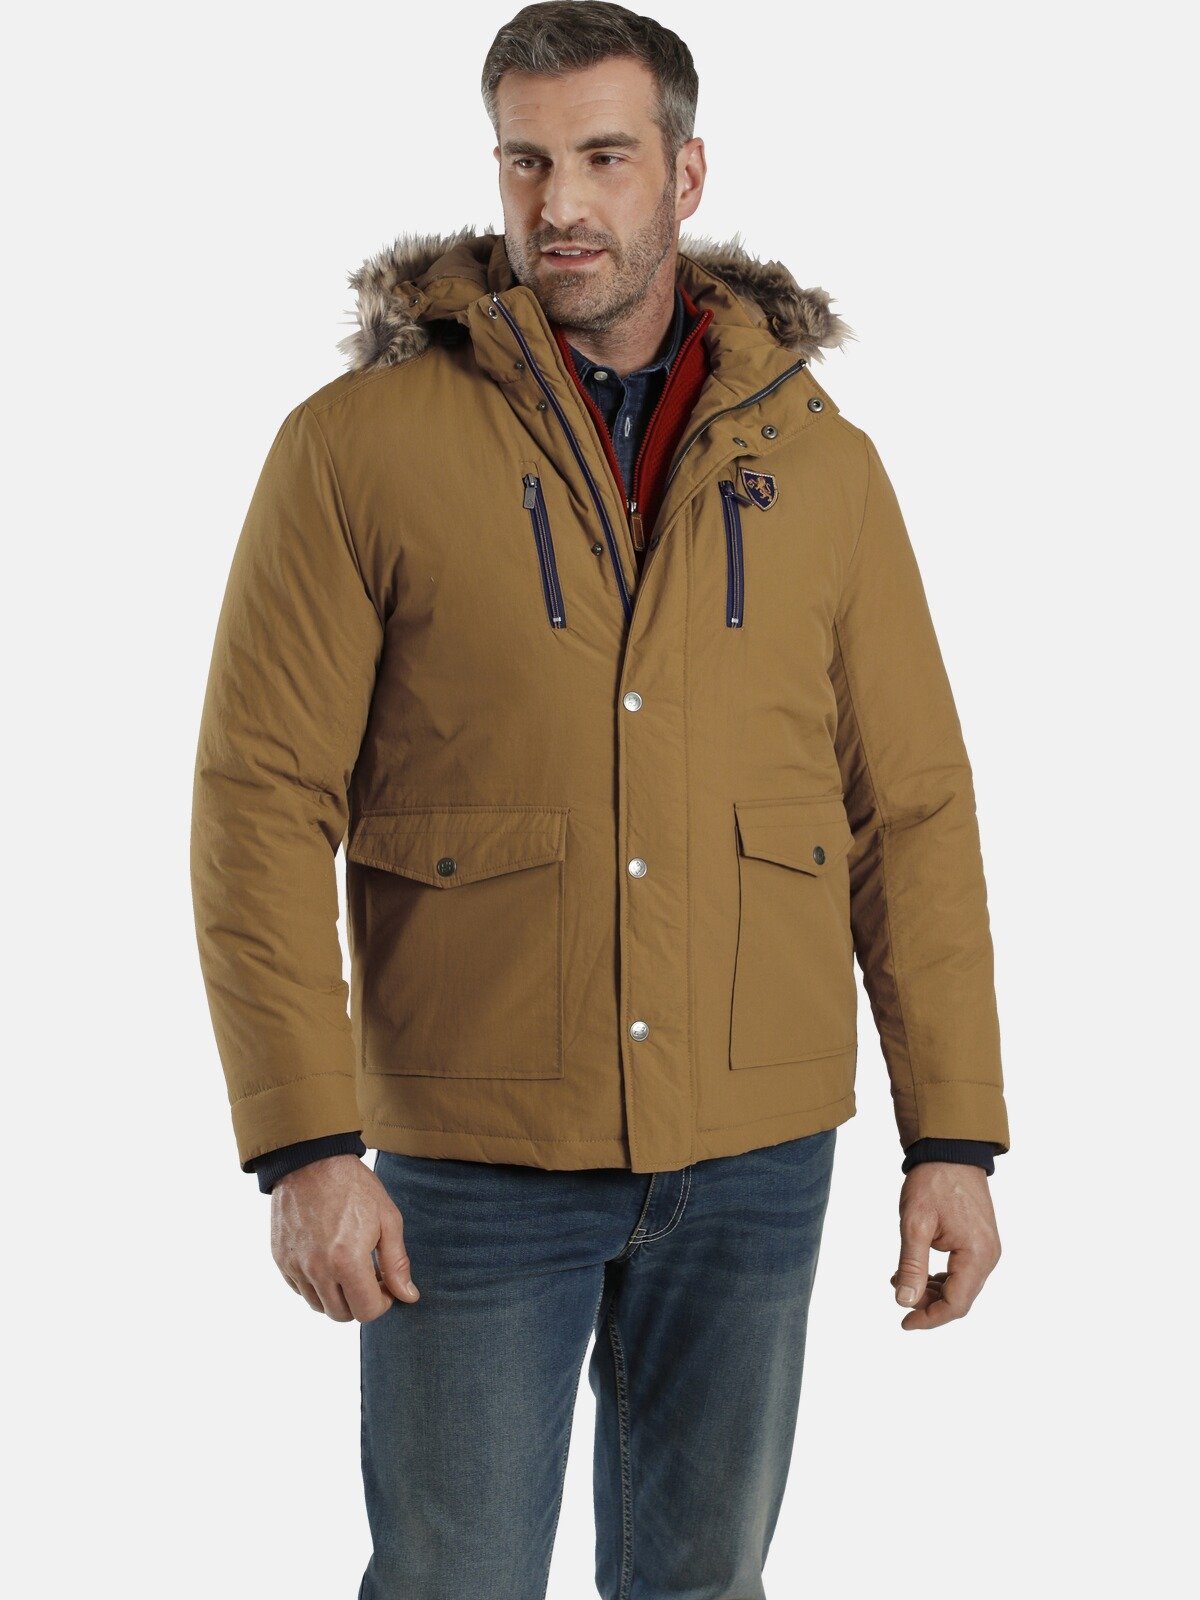 CLARENCE Outdoorjacke abnehmbarer Charles SIR Colby Kapuze mit